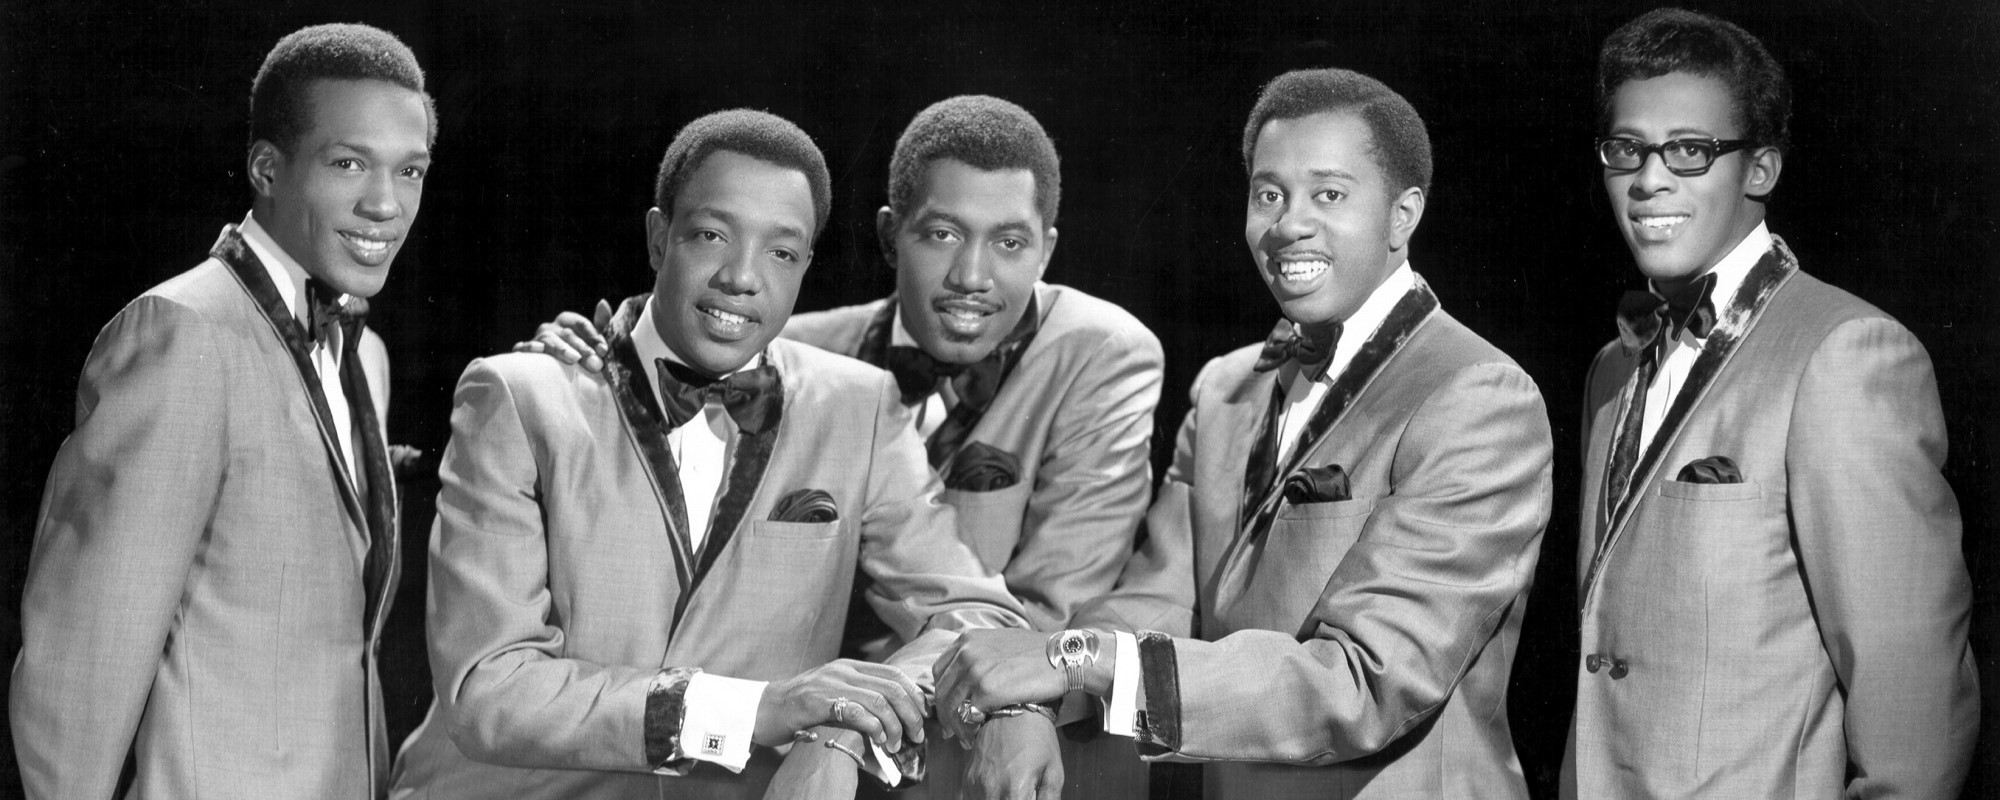 5 Interesting Facts About the Temptations’ Debut Album for Its 60th Anniversary